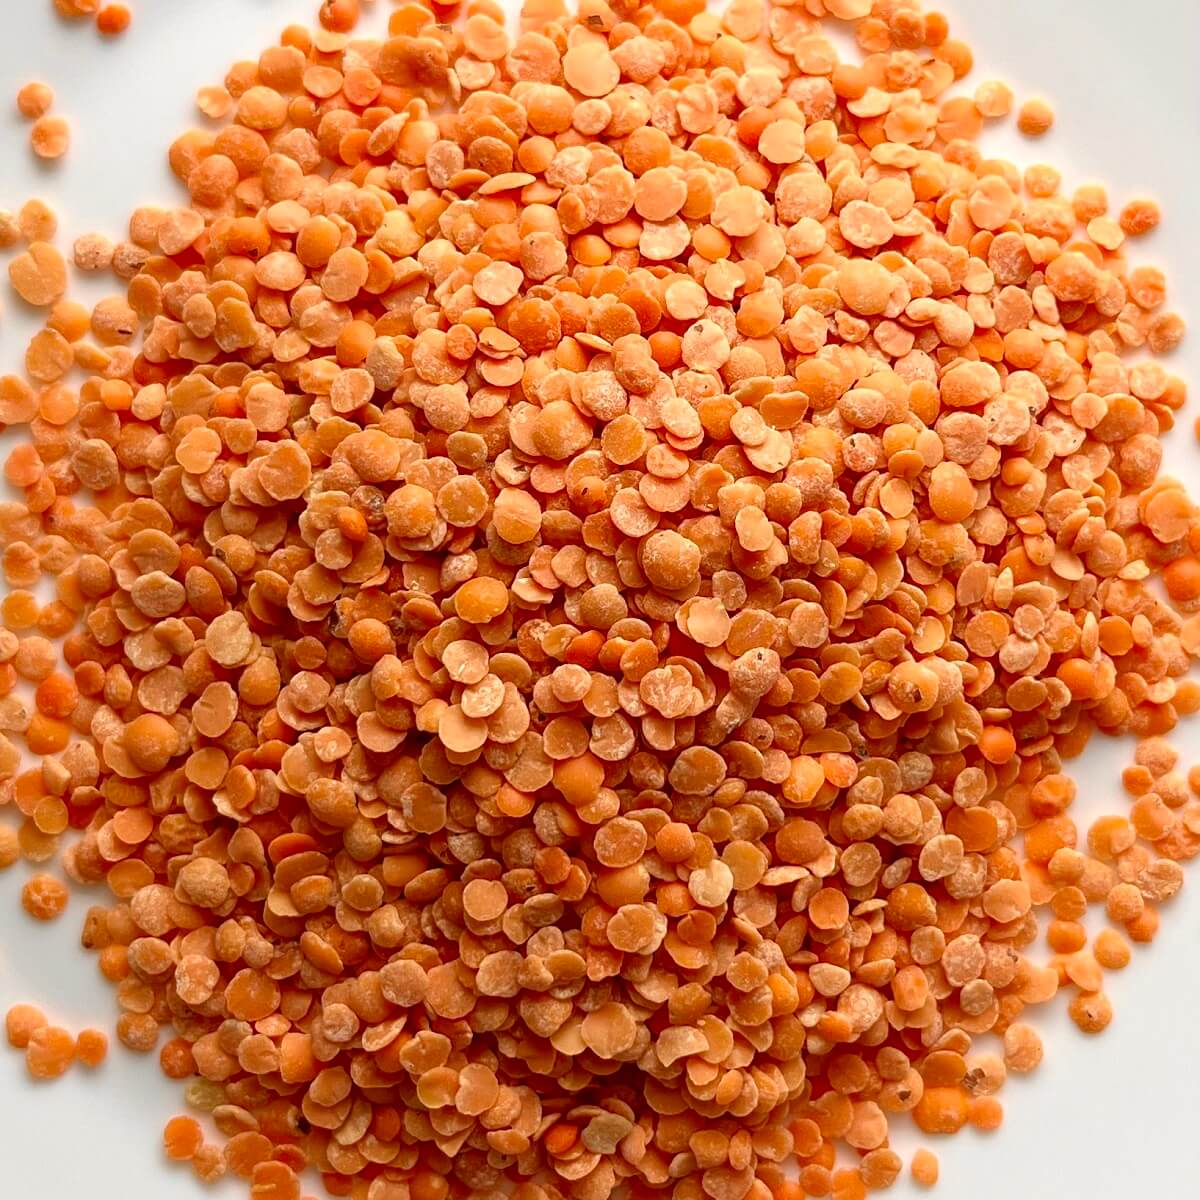 A pile of dried lentils.